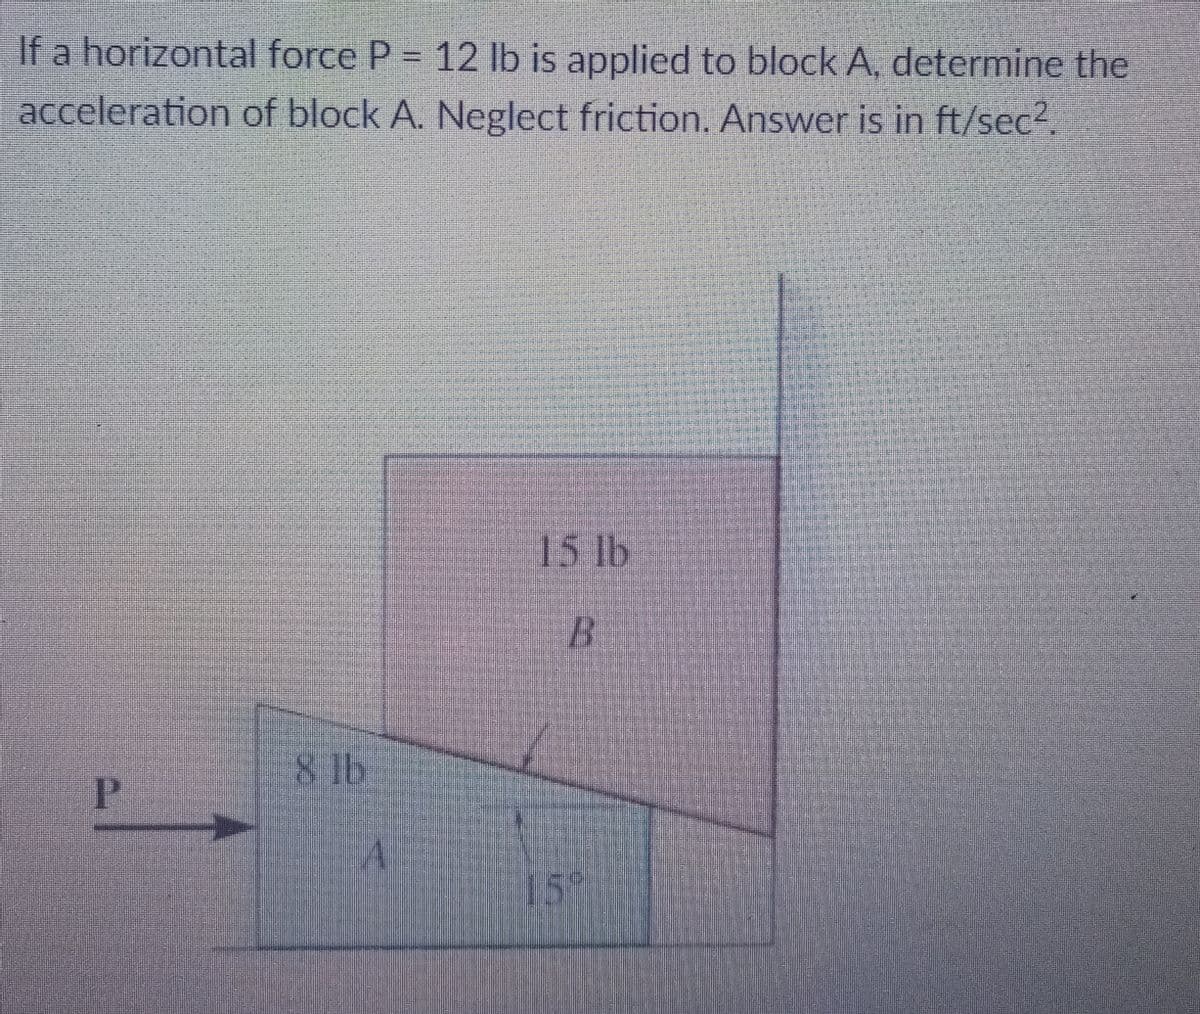 If a horizontal force P = 12 lb is applied to block A, determine the
acceleration of block A. Neglect friction. Answer is in ft/sec2
15 lb
8 lb
P.
15°
